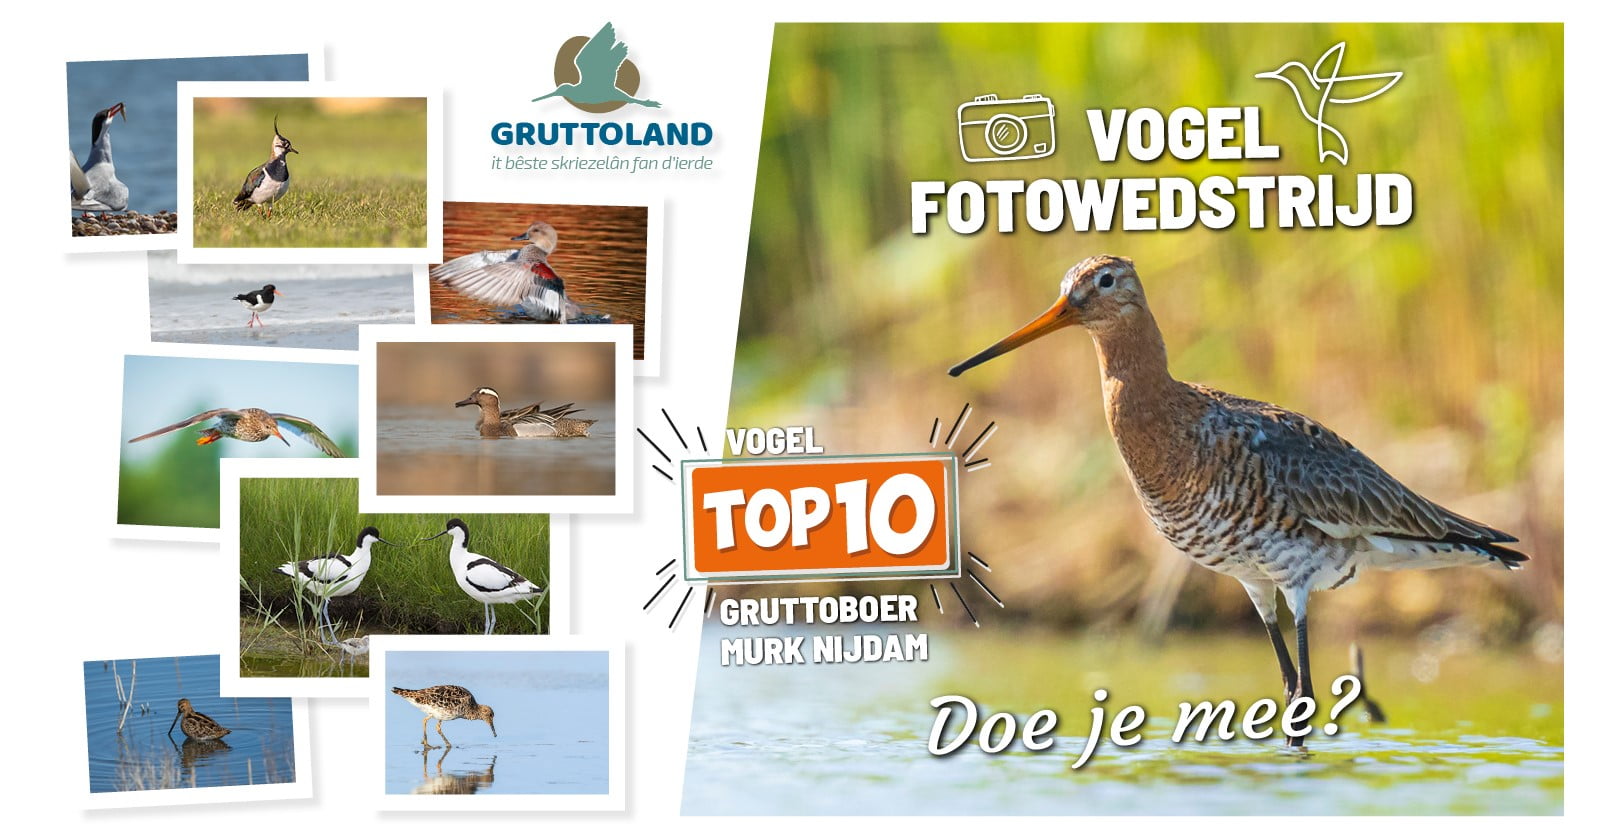 Featured image for “Fotowedstrijd”